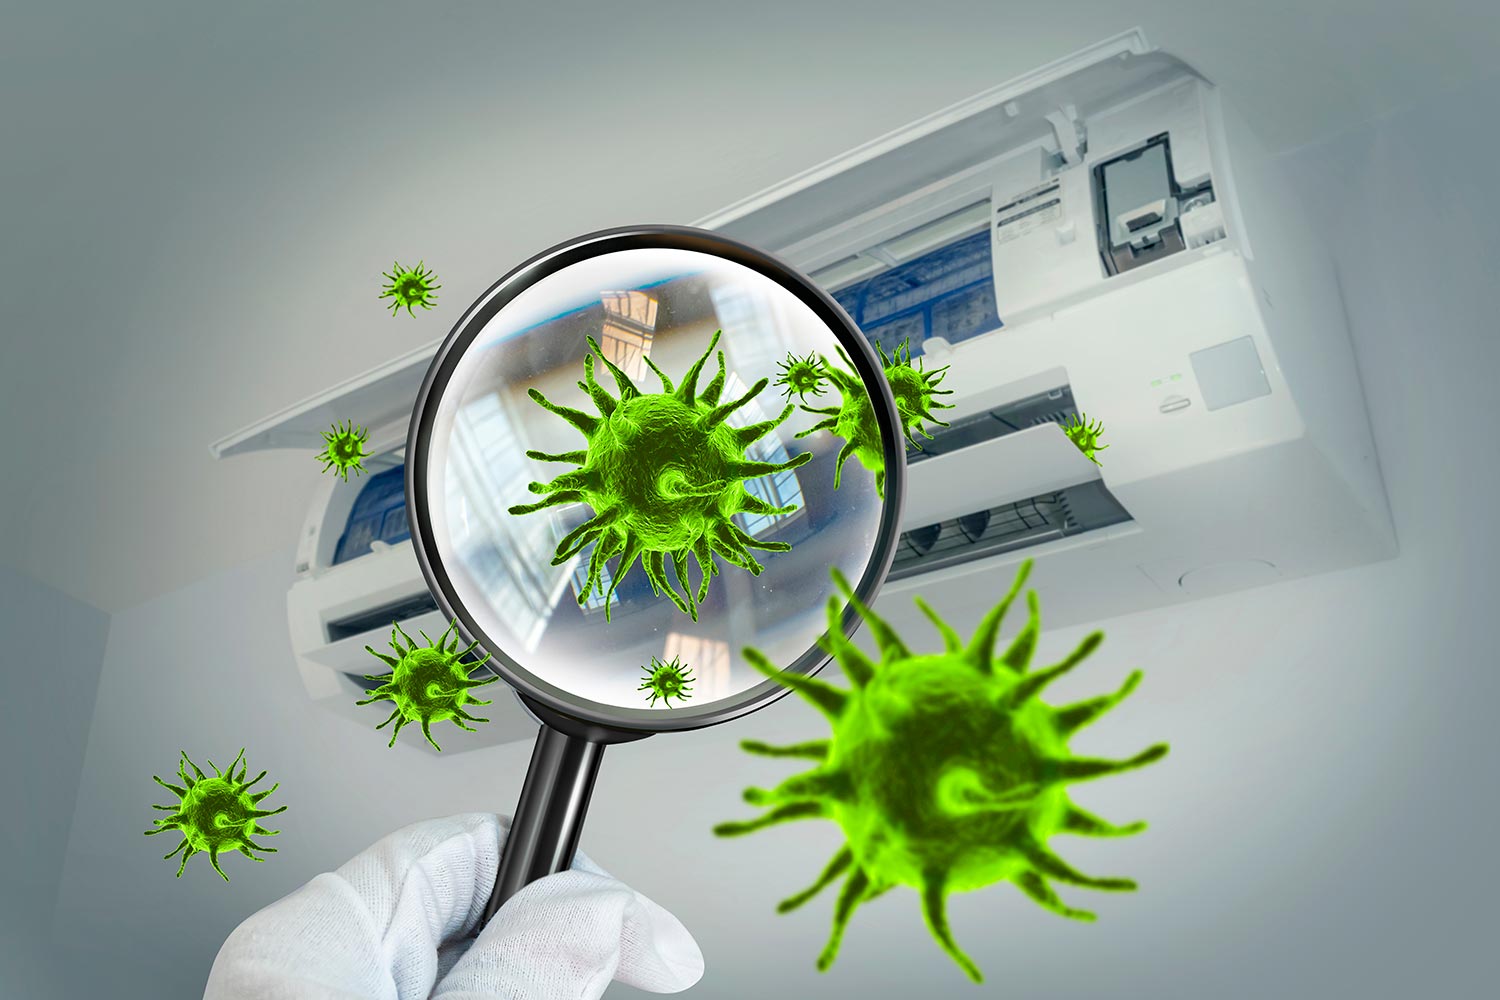 3D simulation of viruses inside the air conditioner by showing through a magnifying glass